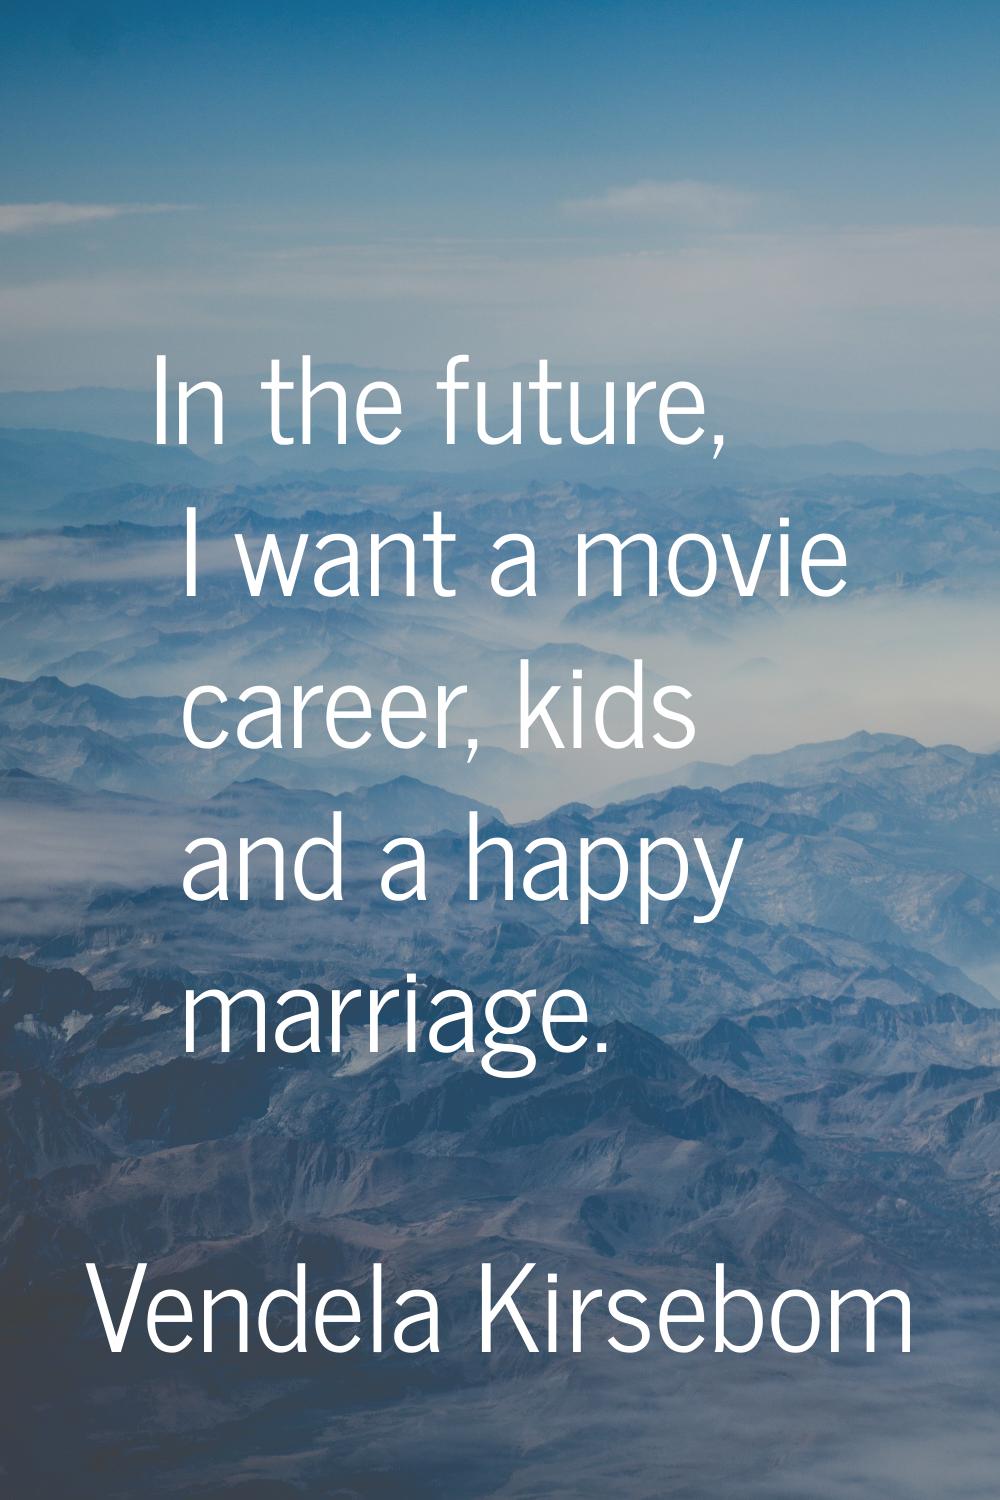 In the future, I want a movie career, kids and a happy marriage.